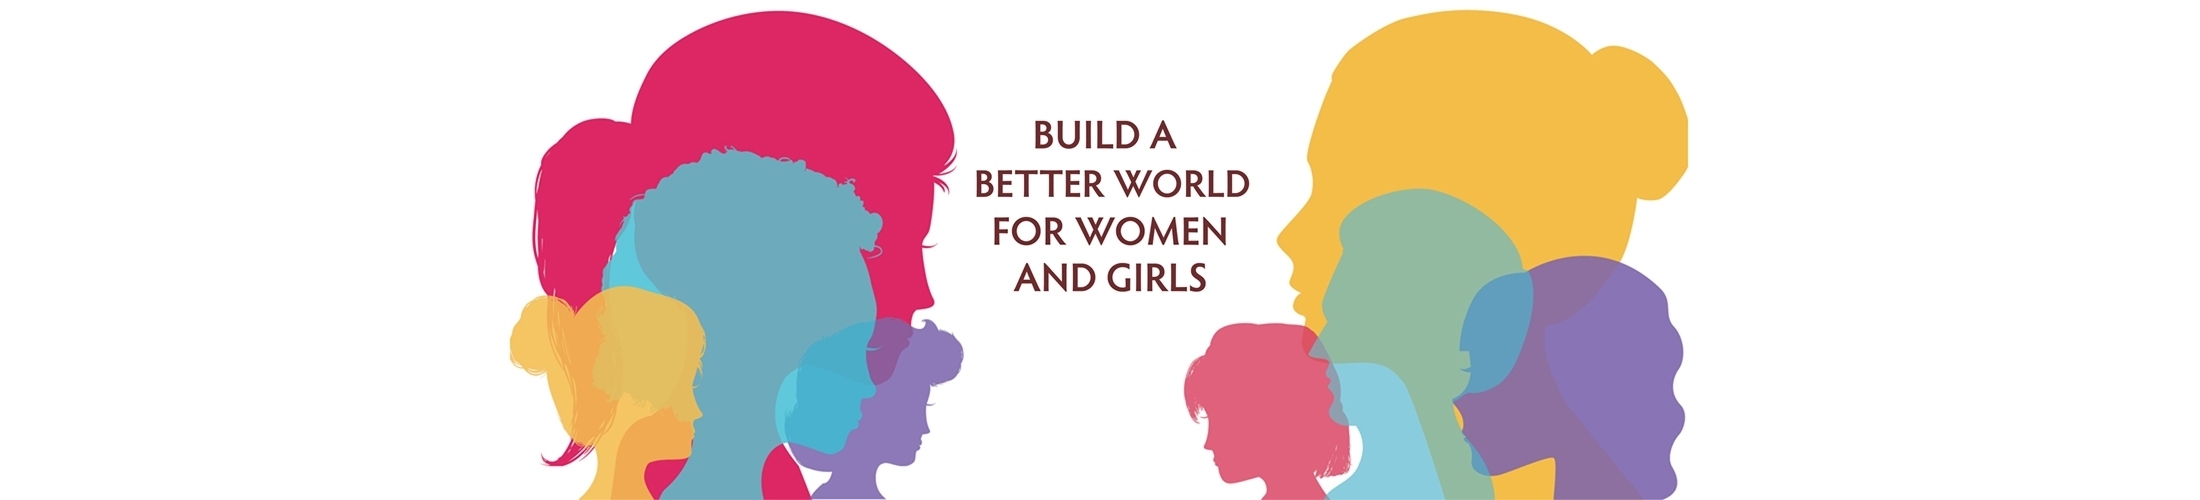 Build a better world for women and girls